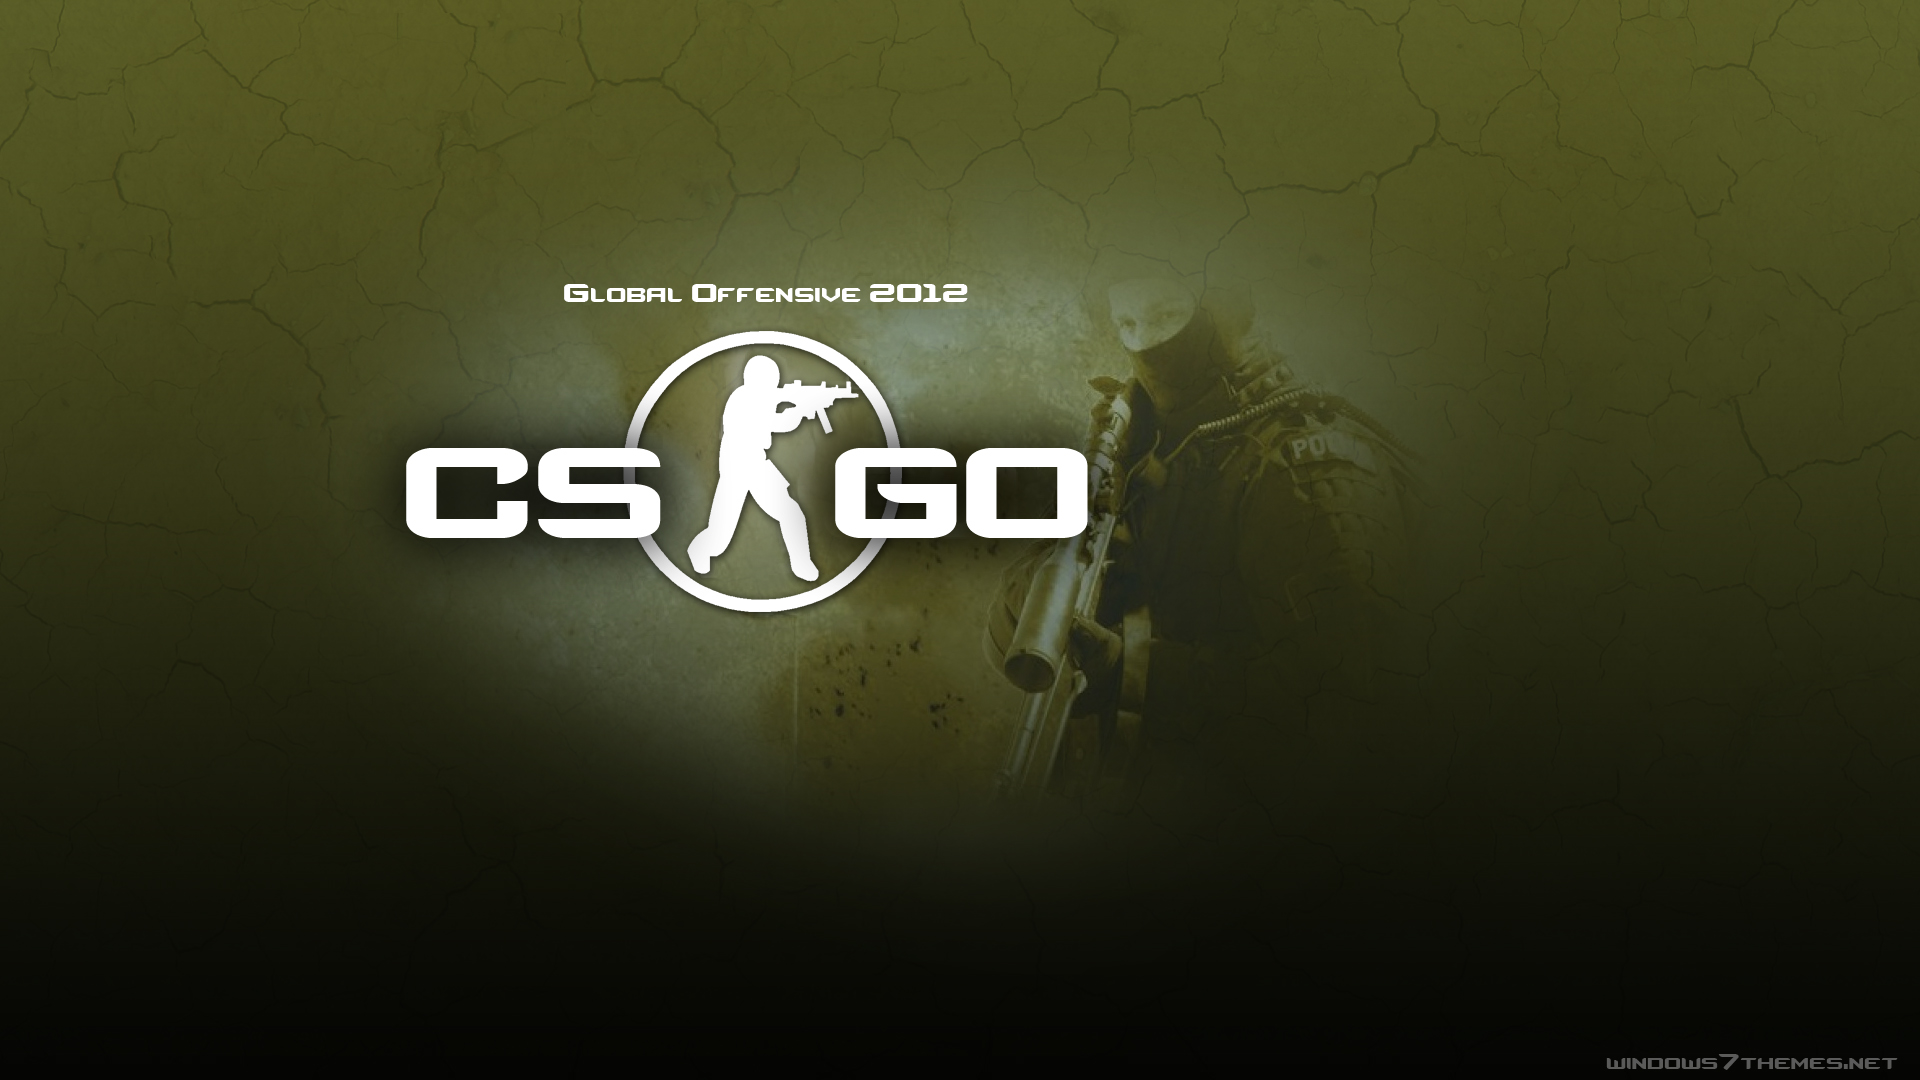 have any fanmade wallpapers created for the upcoming Counter Strike